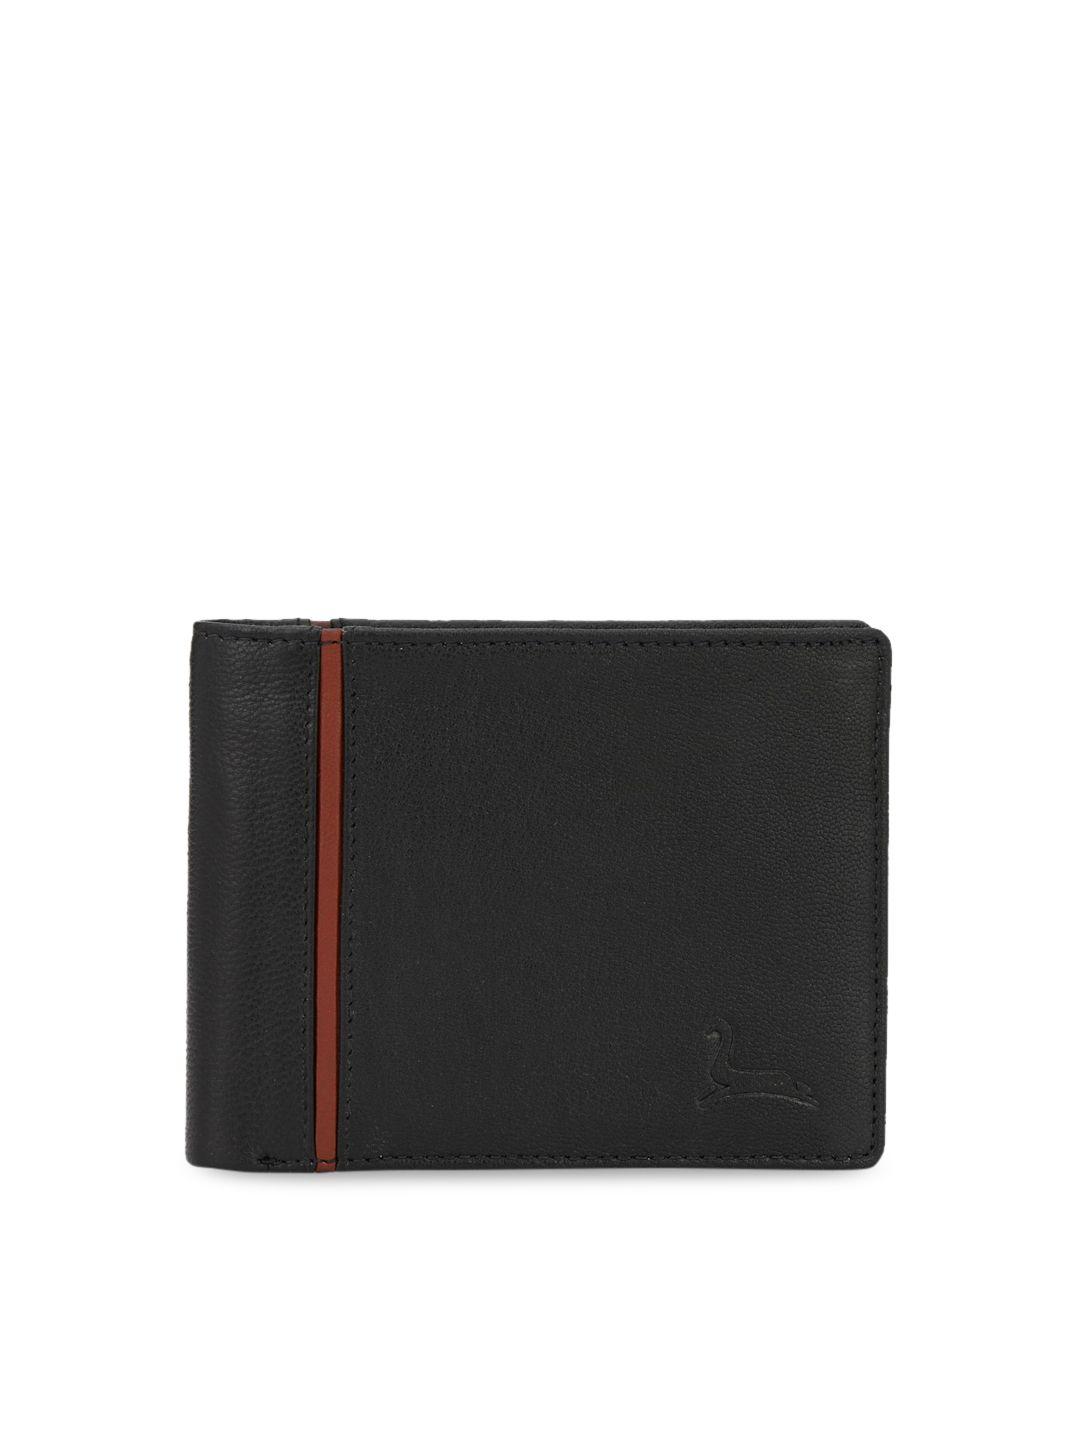 pacific gold men black solid leather two fold wallet